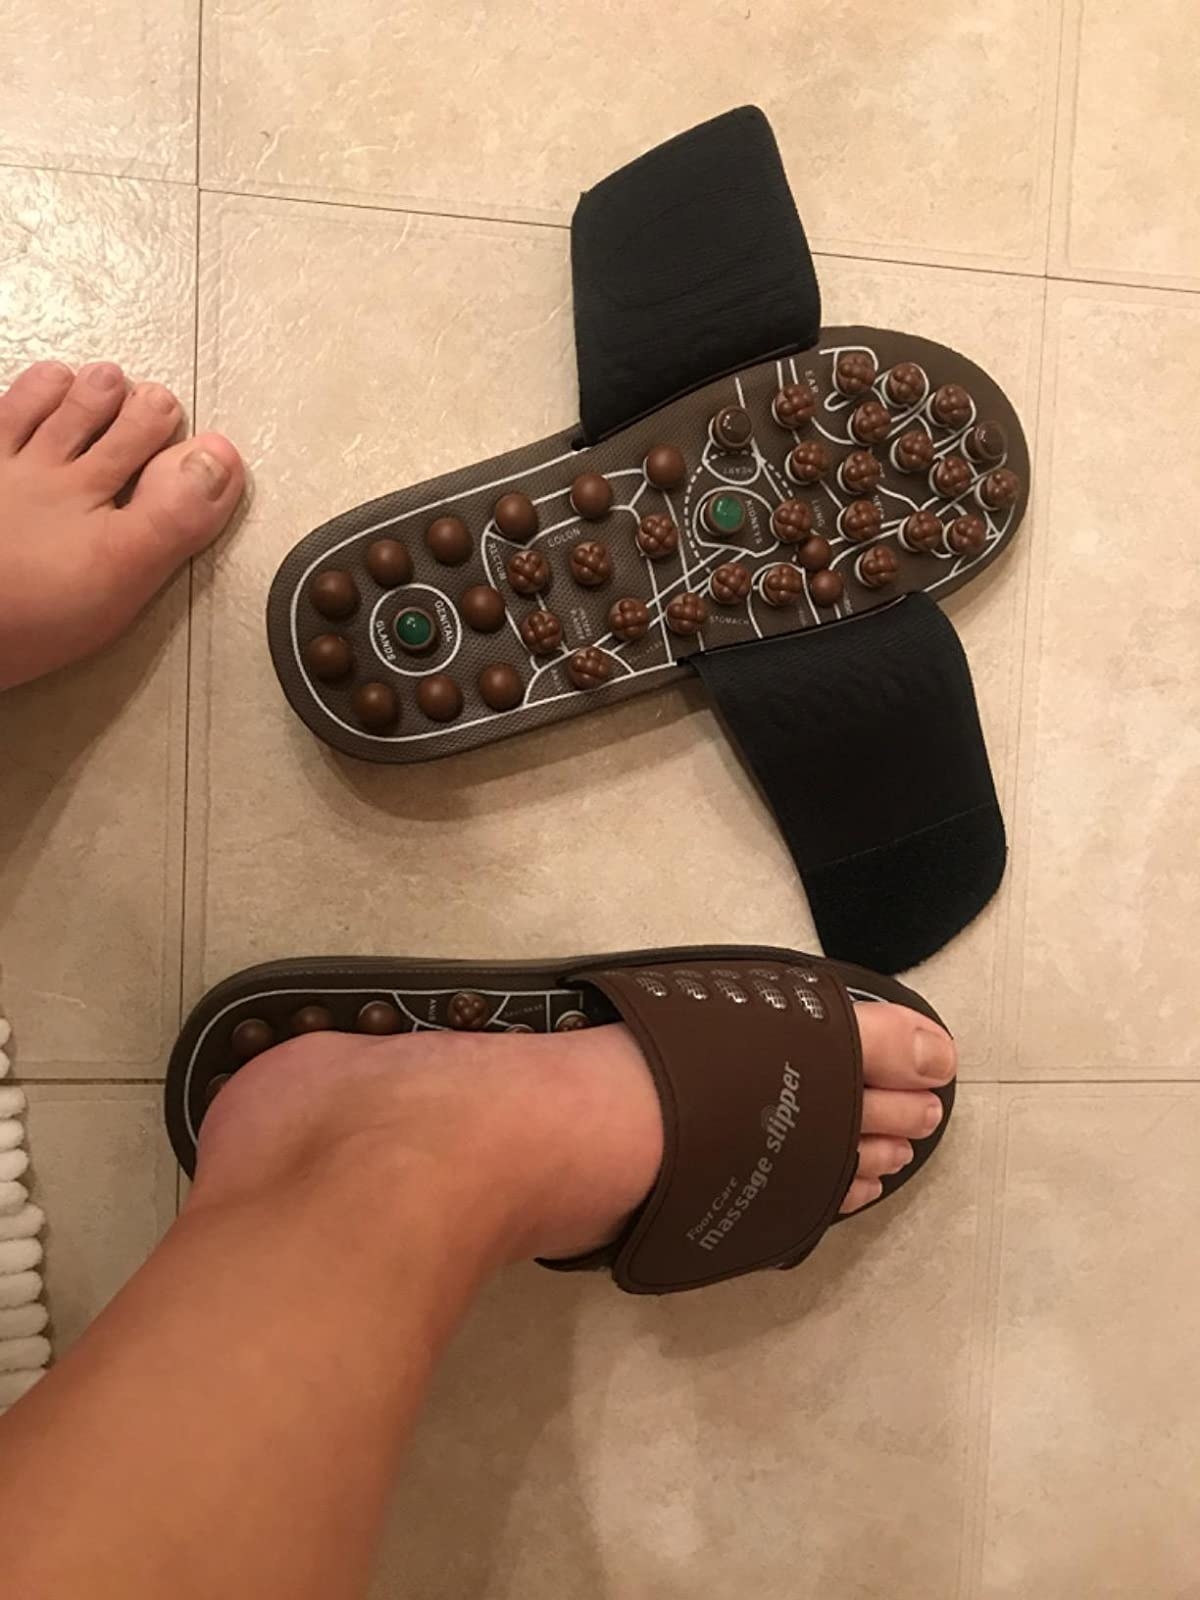 reviewer image of them wearing the shanlu foot massager sandals